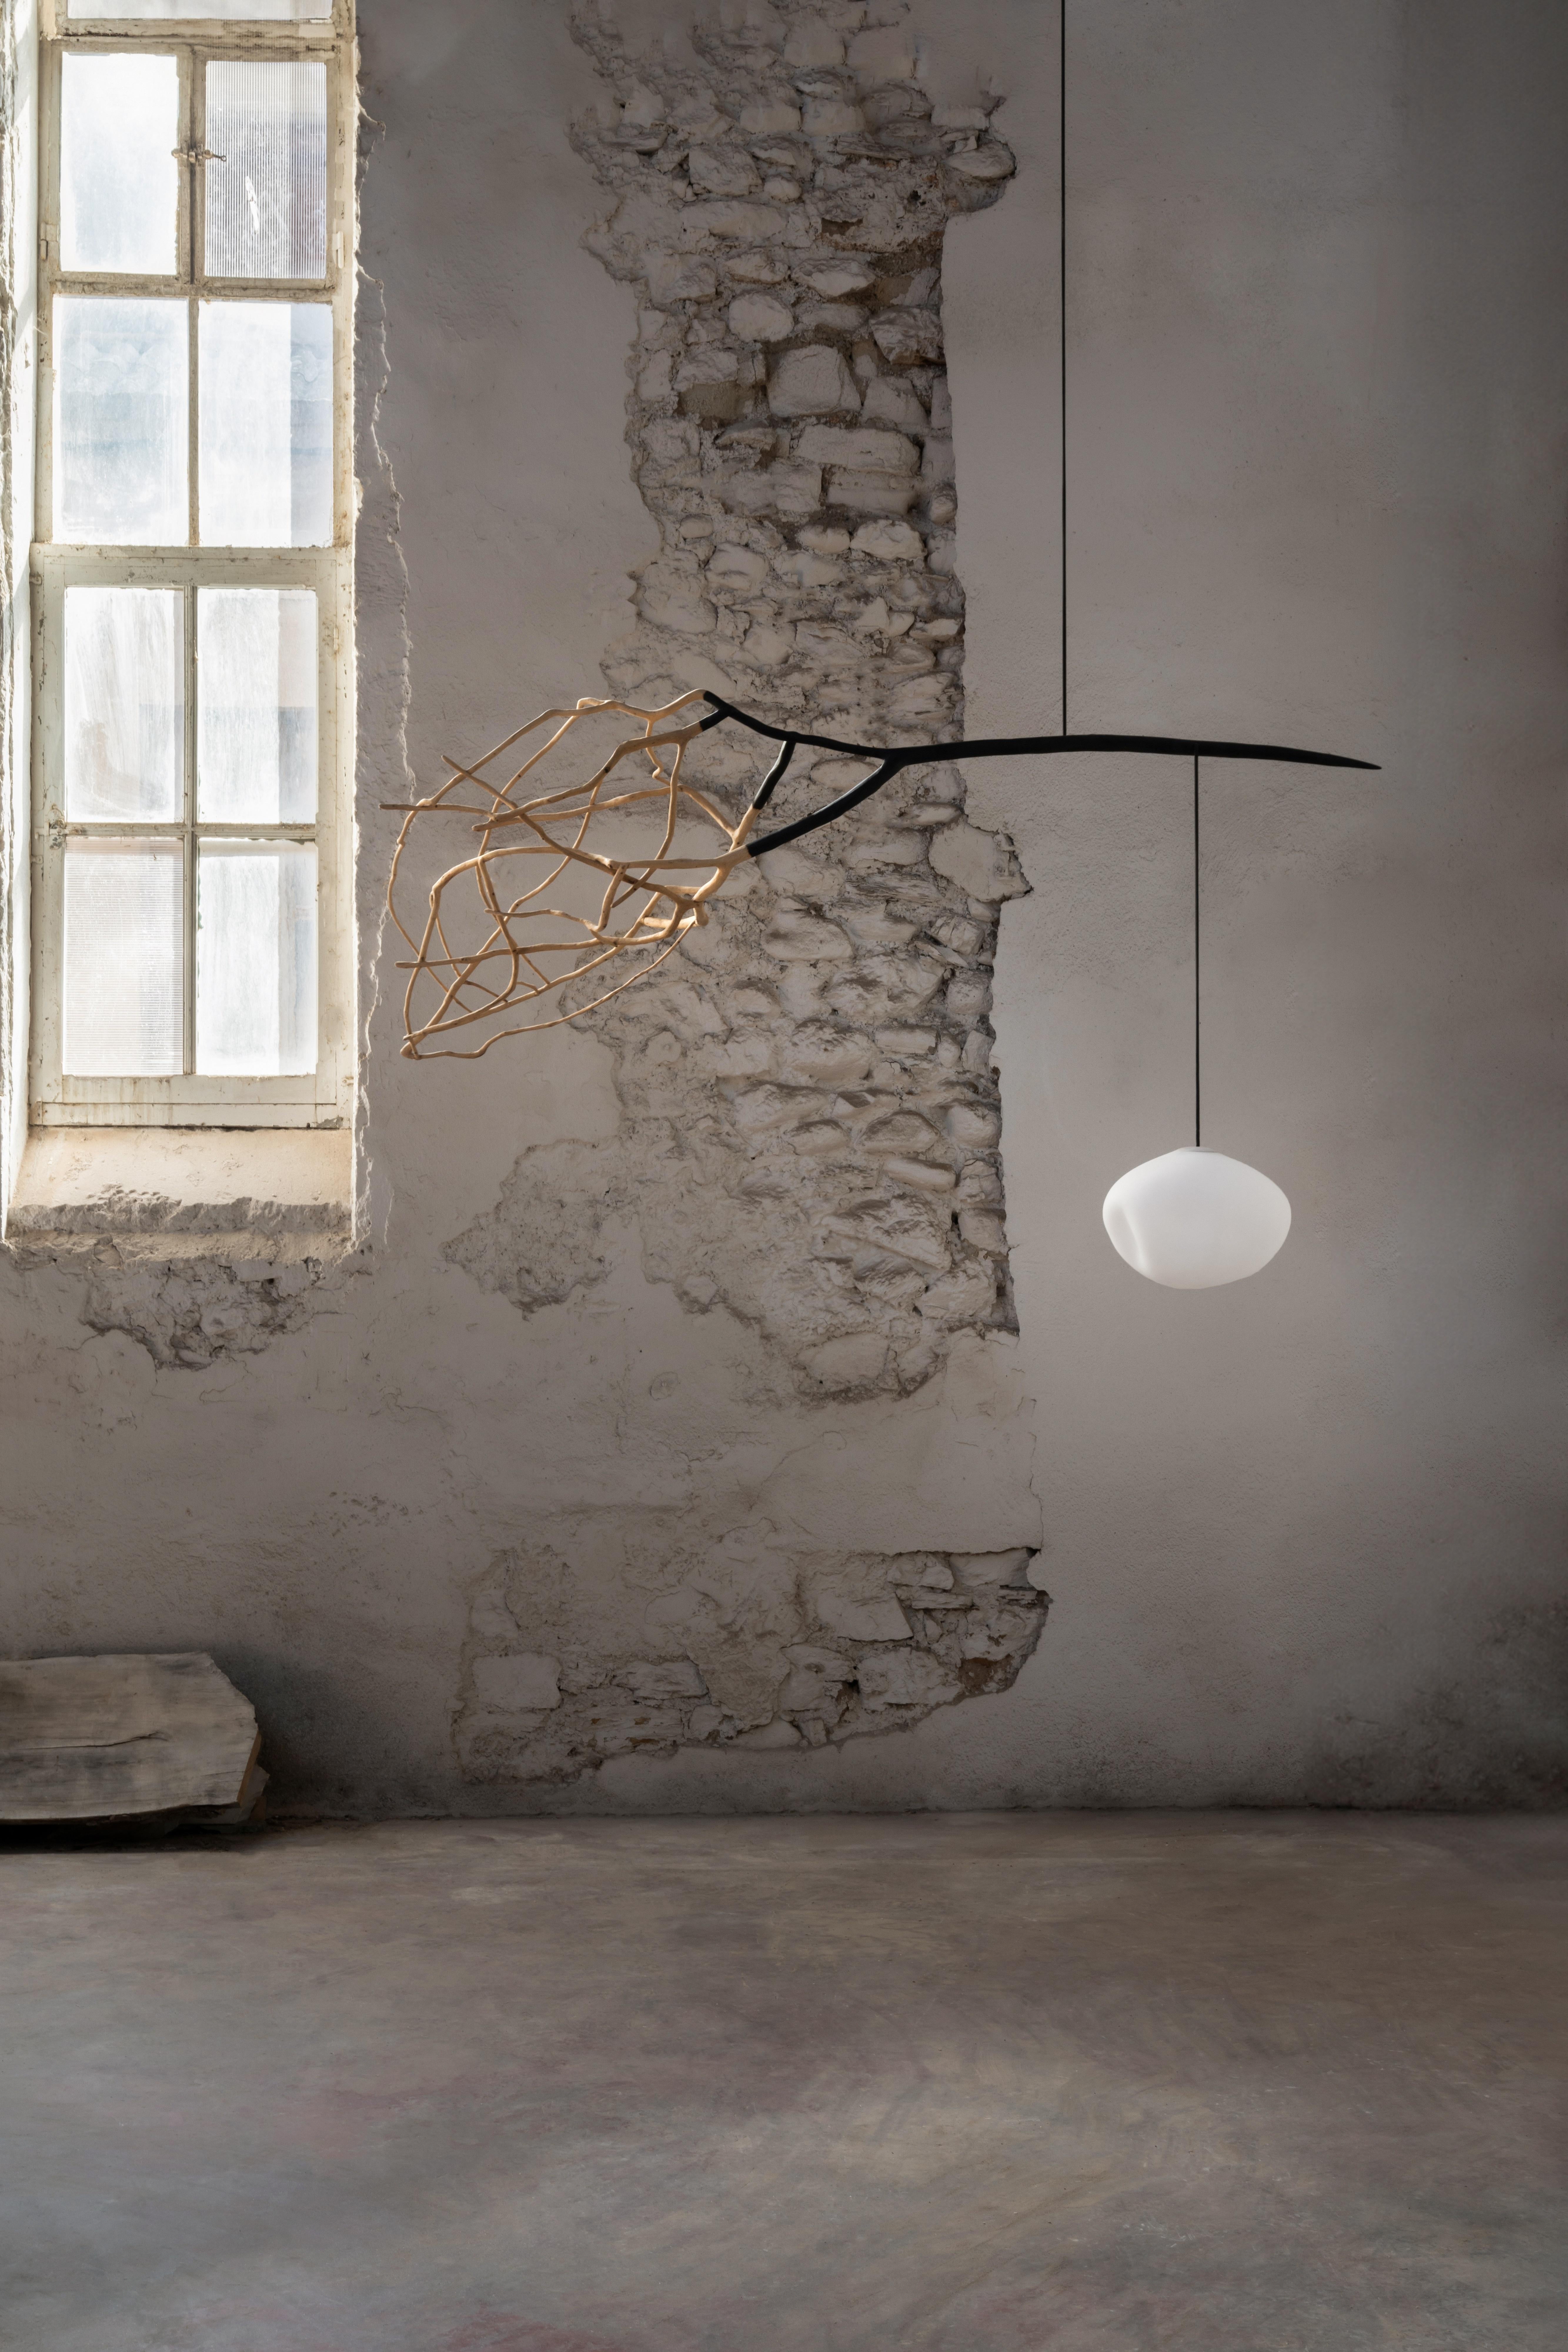 Icarus Suspension Lamp by Jérôme Pereira
Unique Piece
Dimensions: D 70 x W 60 x H 180 cm
Materials: Oak tree, blown glass

All our lamps can be wired according to each country. If sold to the USA it will be wired for the USA for instance.

Jérôme